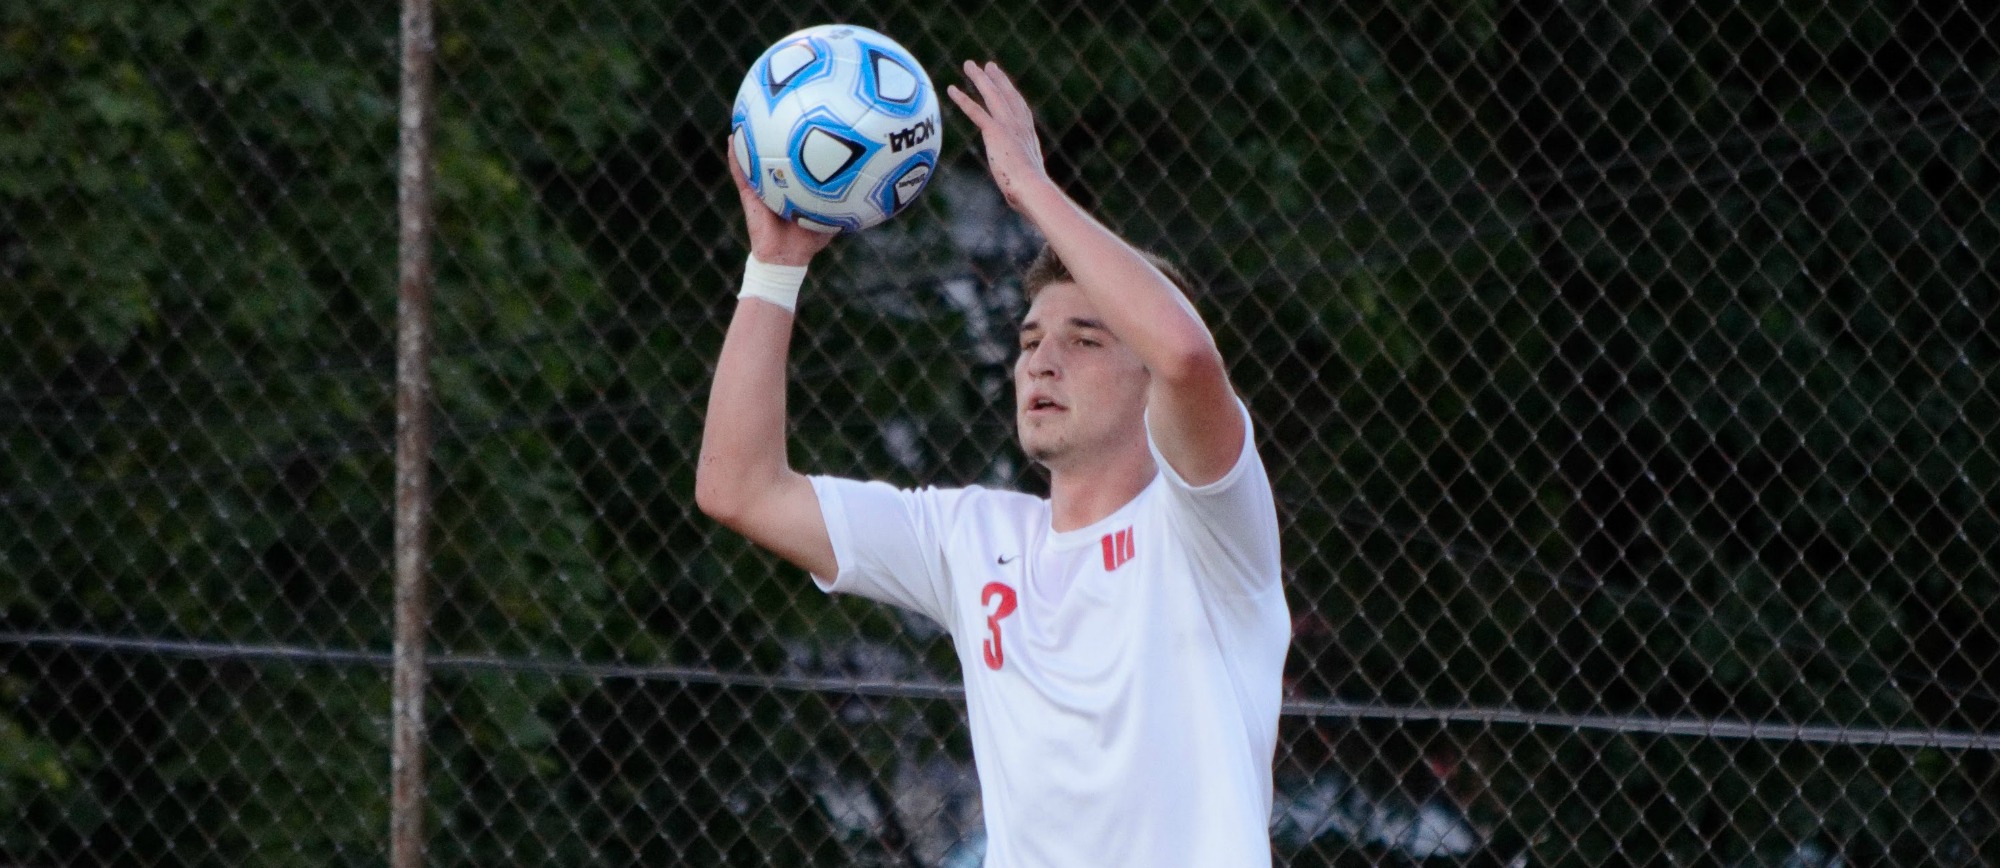 Men's Soccer Stays Hot; Passes Their Way to 3-1 Win Over Bluffton